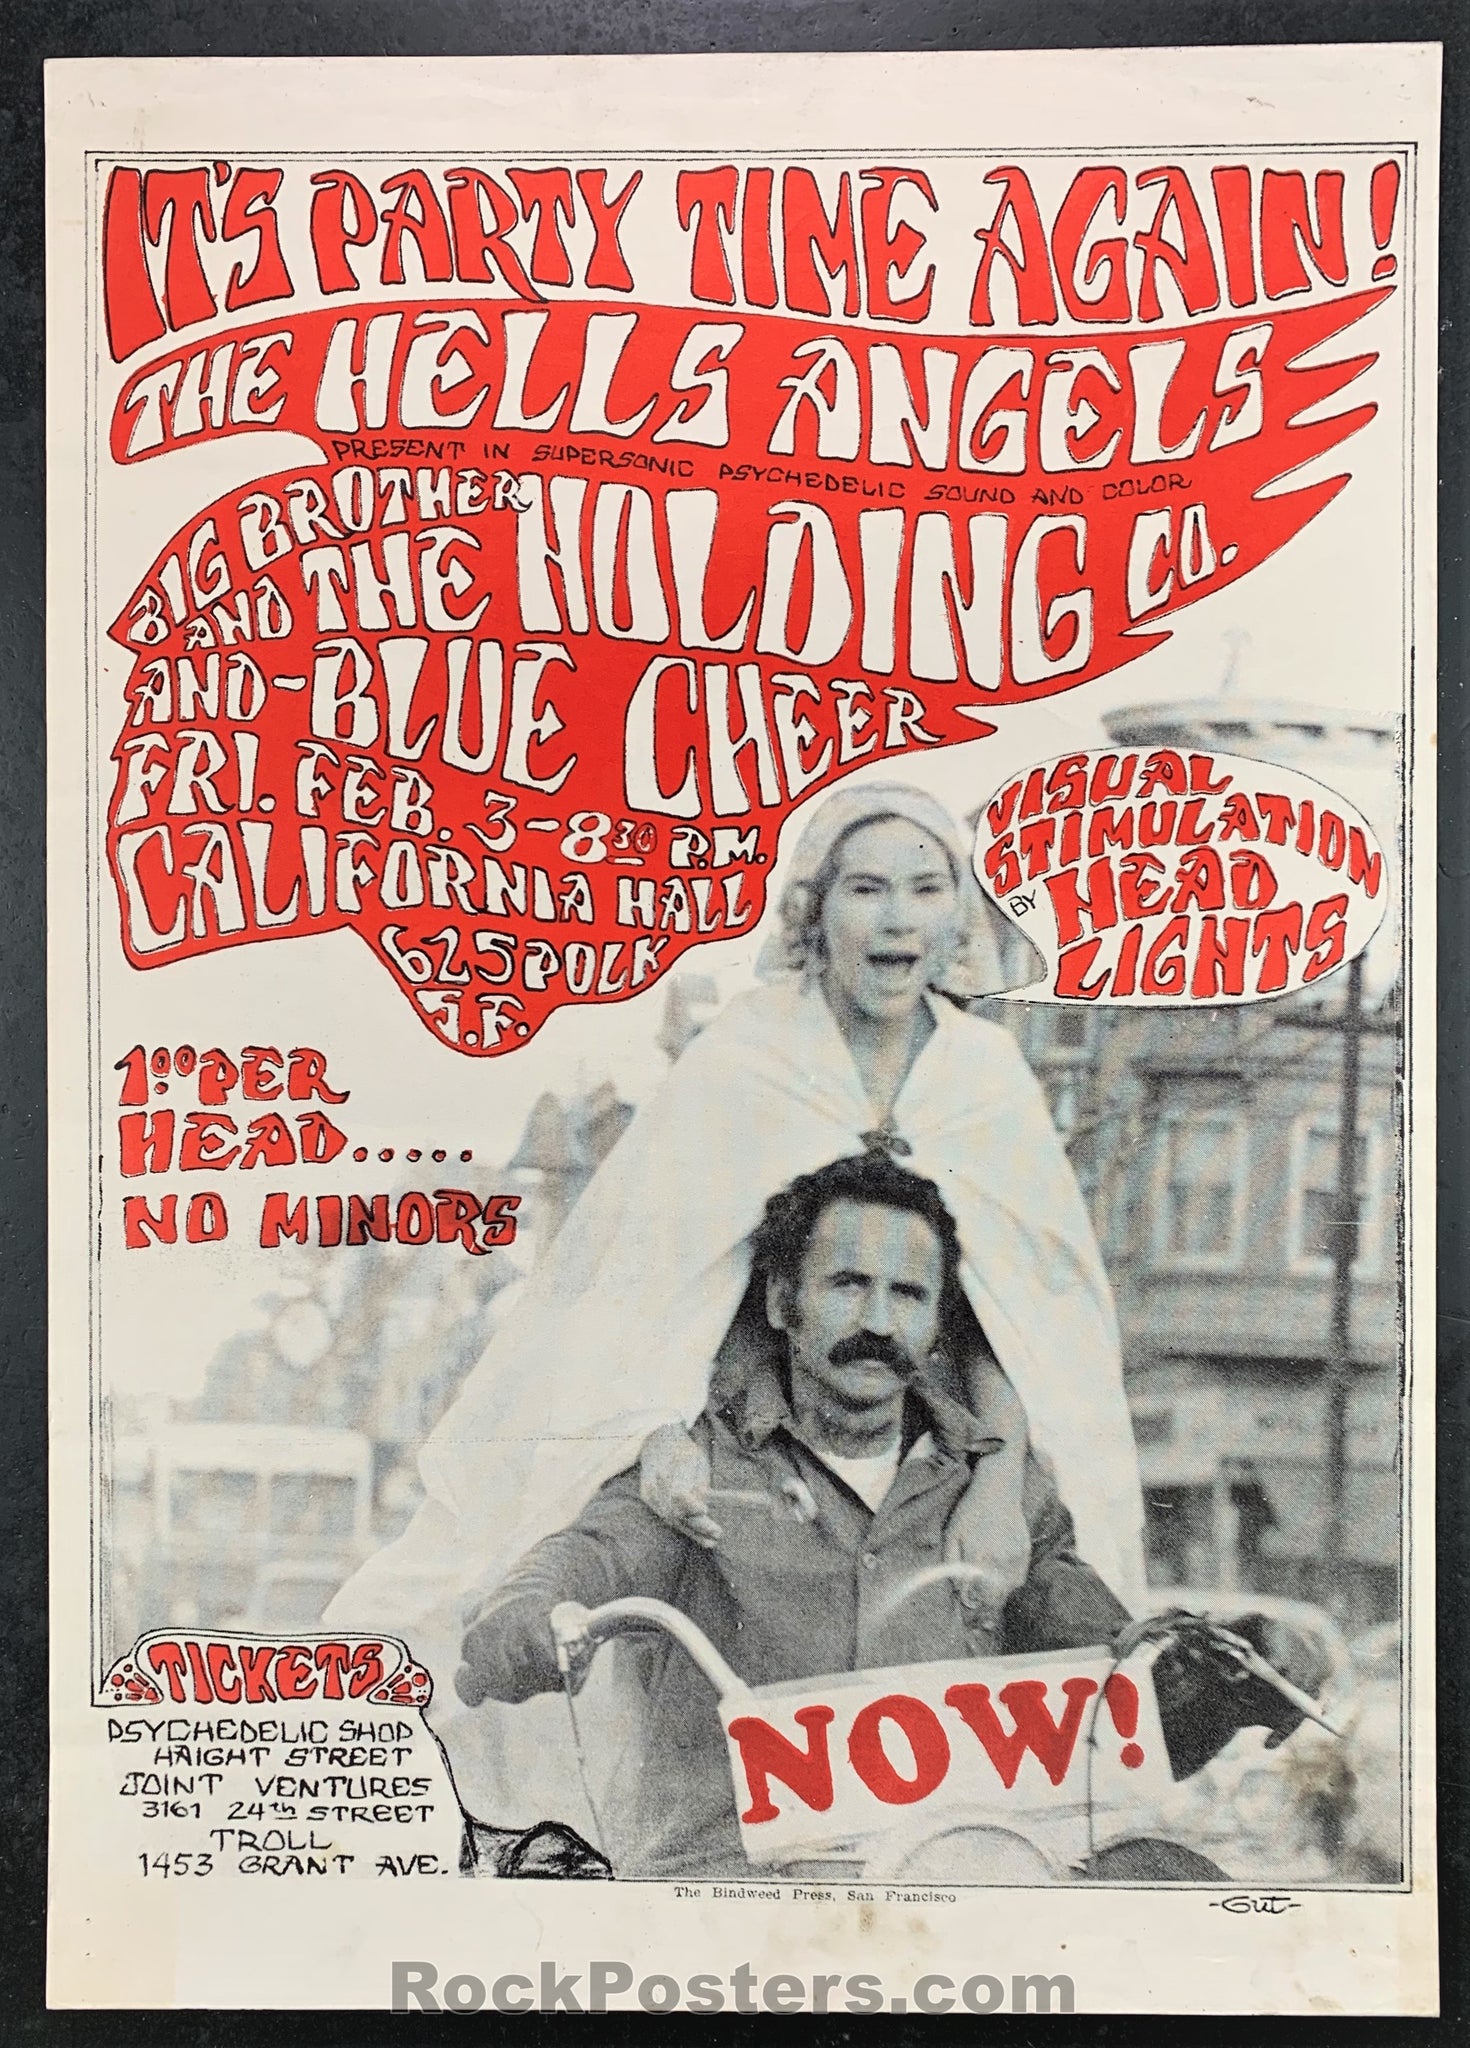 AUCTION - AOR 2.248 - Hell's Angels - Janis Joplin Blue Cheer - 1967 Original Poster - California Hall - Excellent